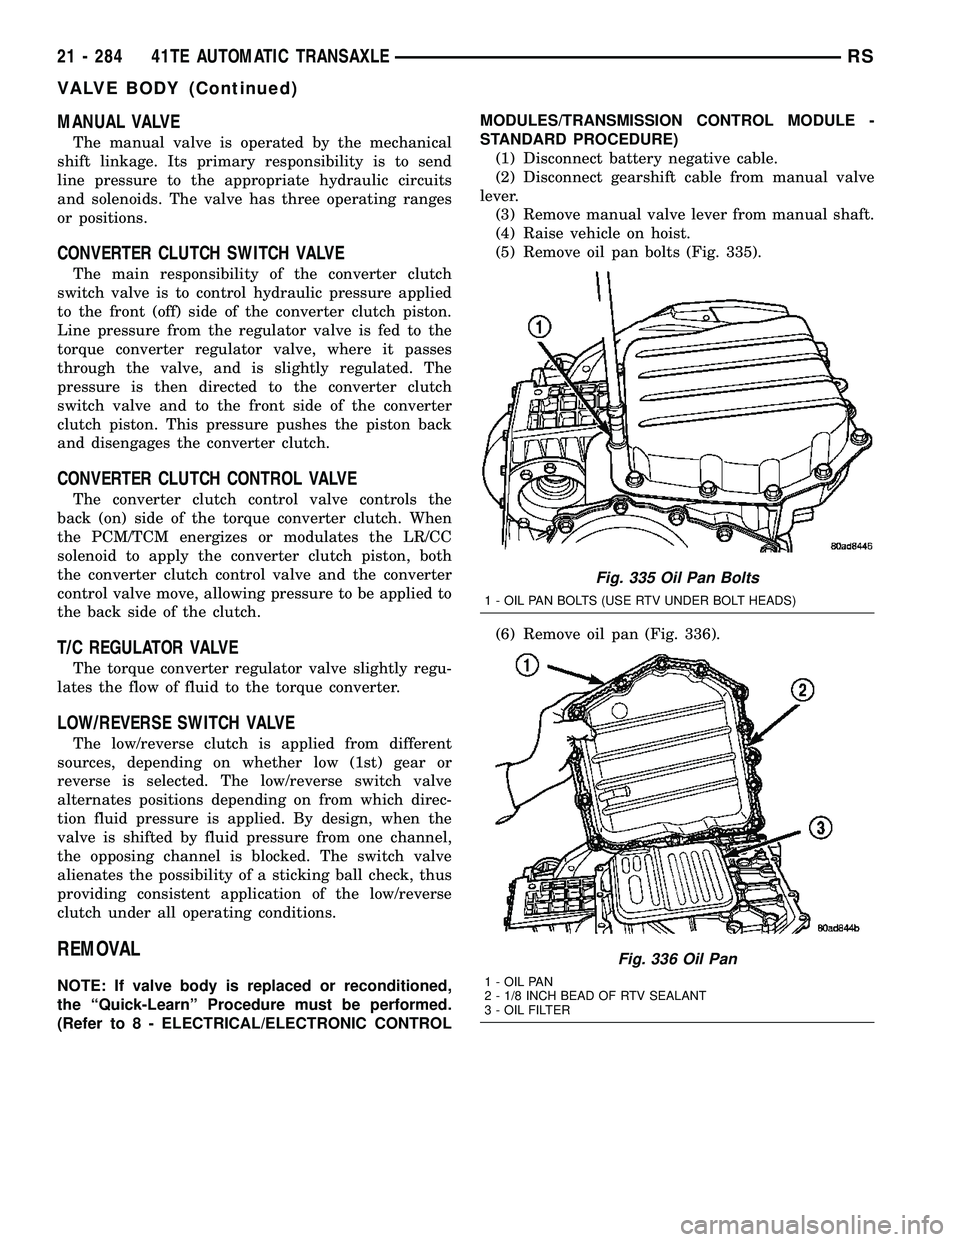 CHRYSLER VOYAGER 2005  Service Manual MANUAL VALVE
The manual valve is operated by the mechanical
shift linkage. Its primary responsibility is to send
line pressure to the appropriate hydraulic circuits
and solenoids. The valve has three 